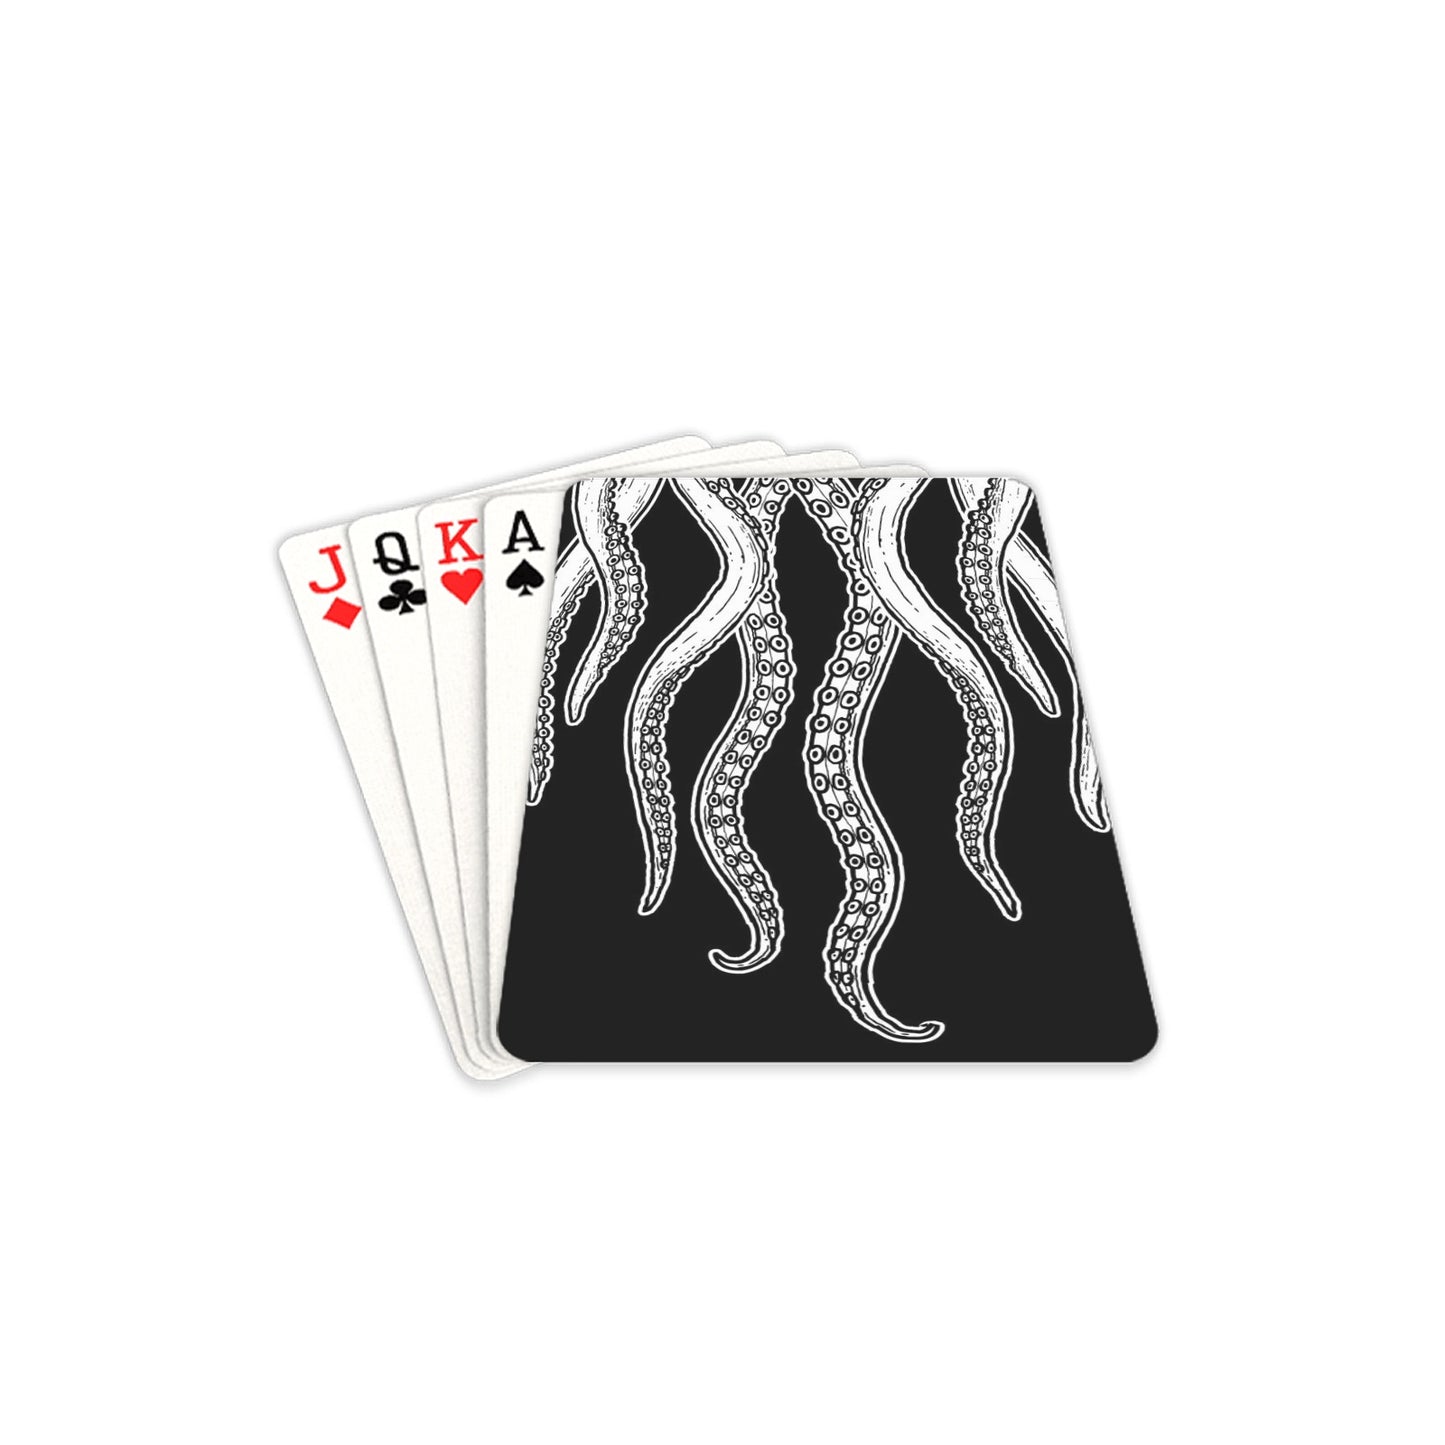 Octopus Tentacles - Playing Cards 2.5"x3.5" Playing Card 2.5"x3.5"